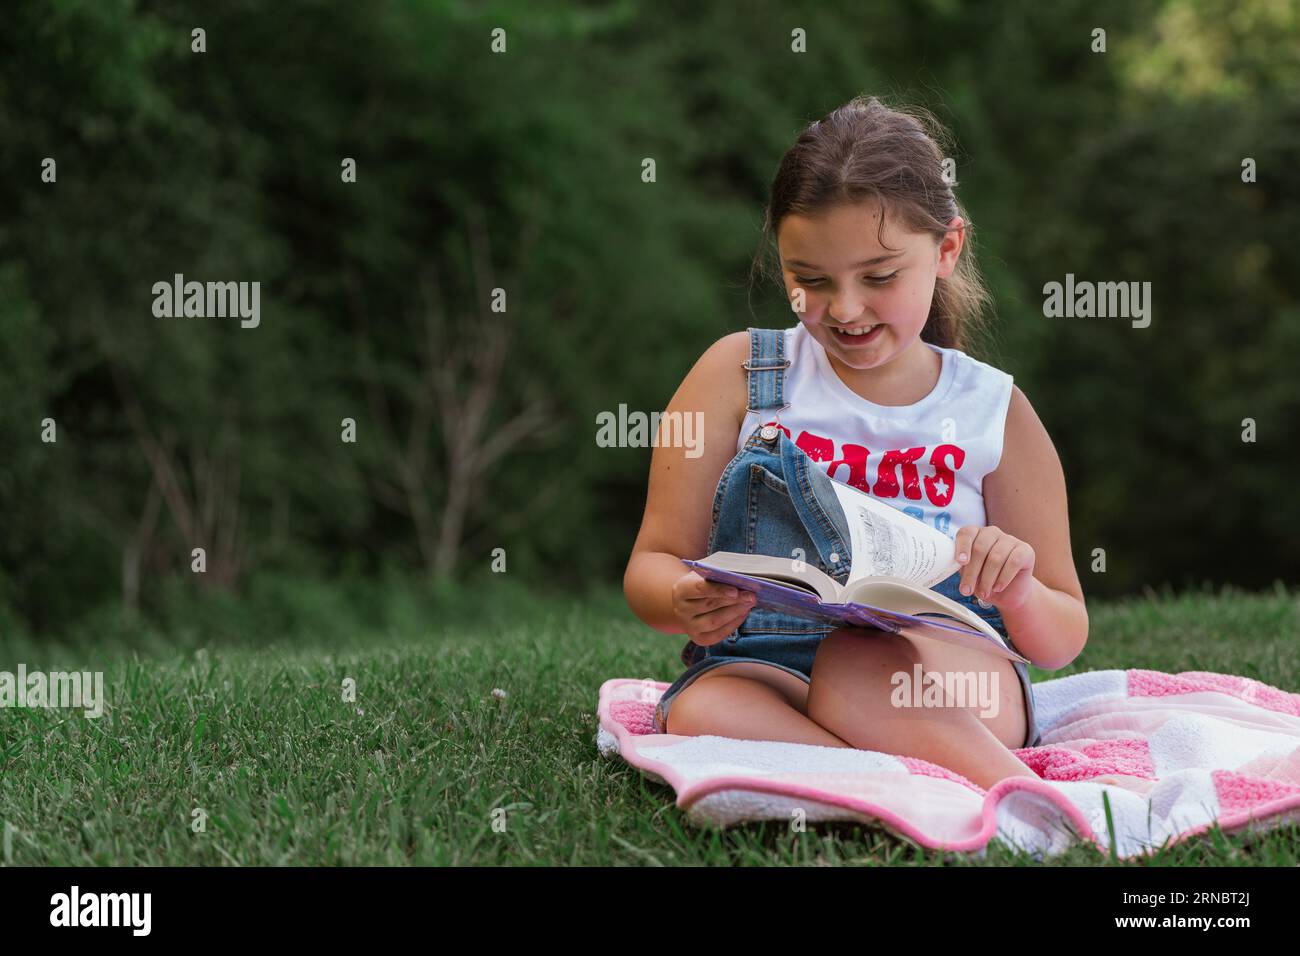 A young girl sitting on a blanket reading a book Stock Photo